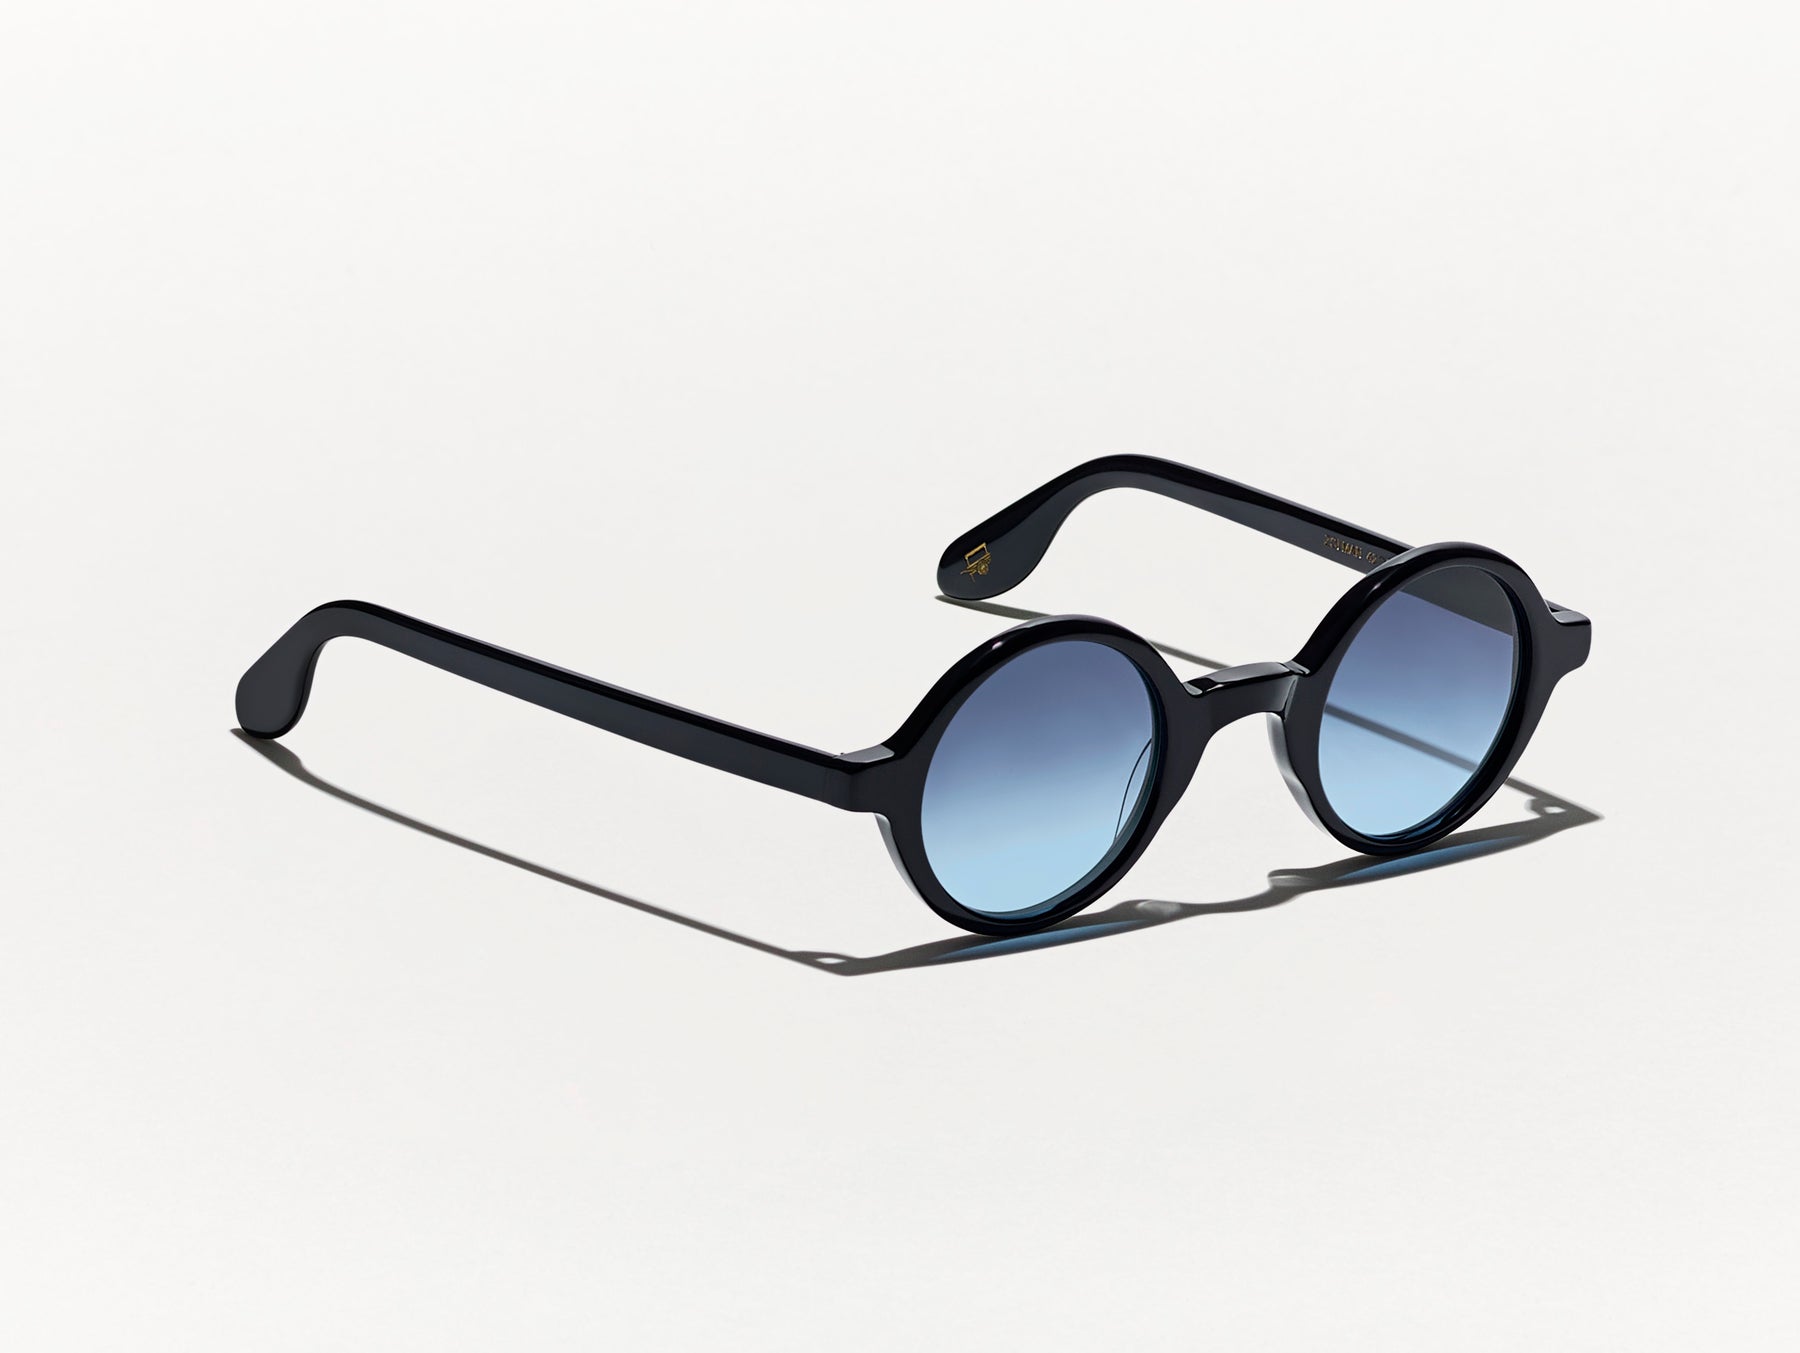 The ZOLMAN in Black with Denim Blue Tinted Lenses